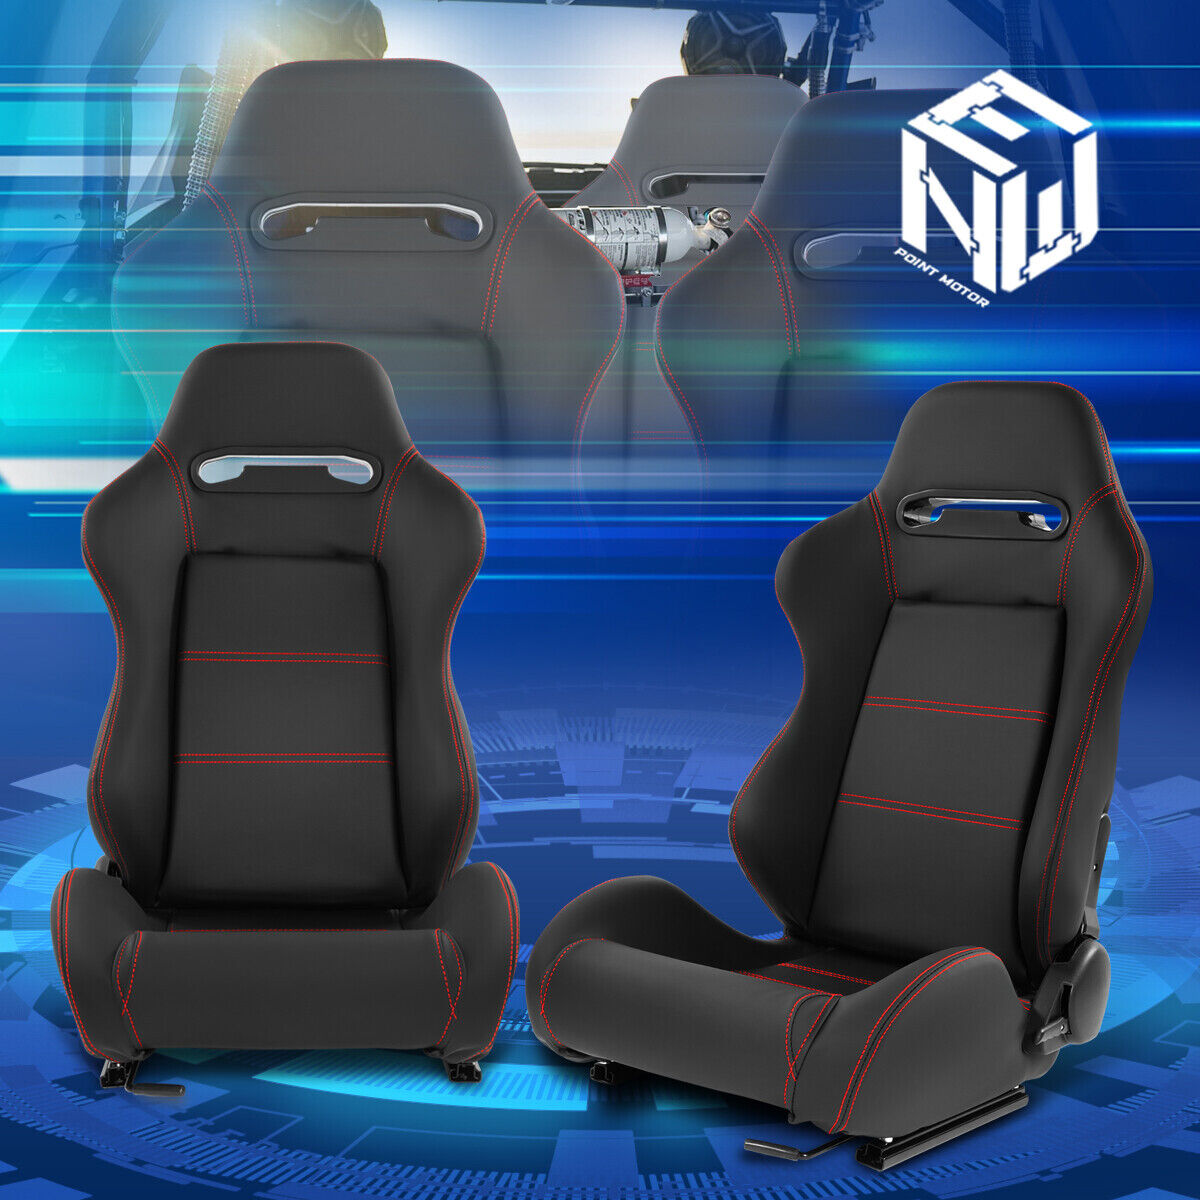 Set of 2 Universal Leather Vinyl Reclinable Racing Seats w/Sliders Red Stitching